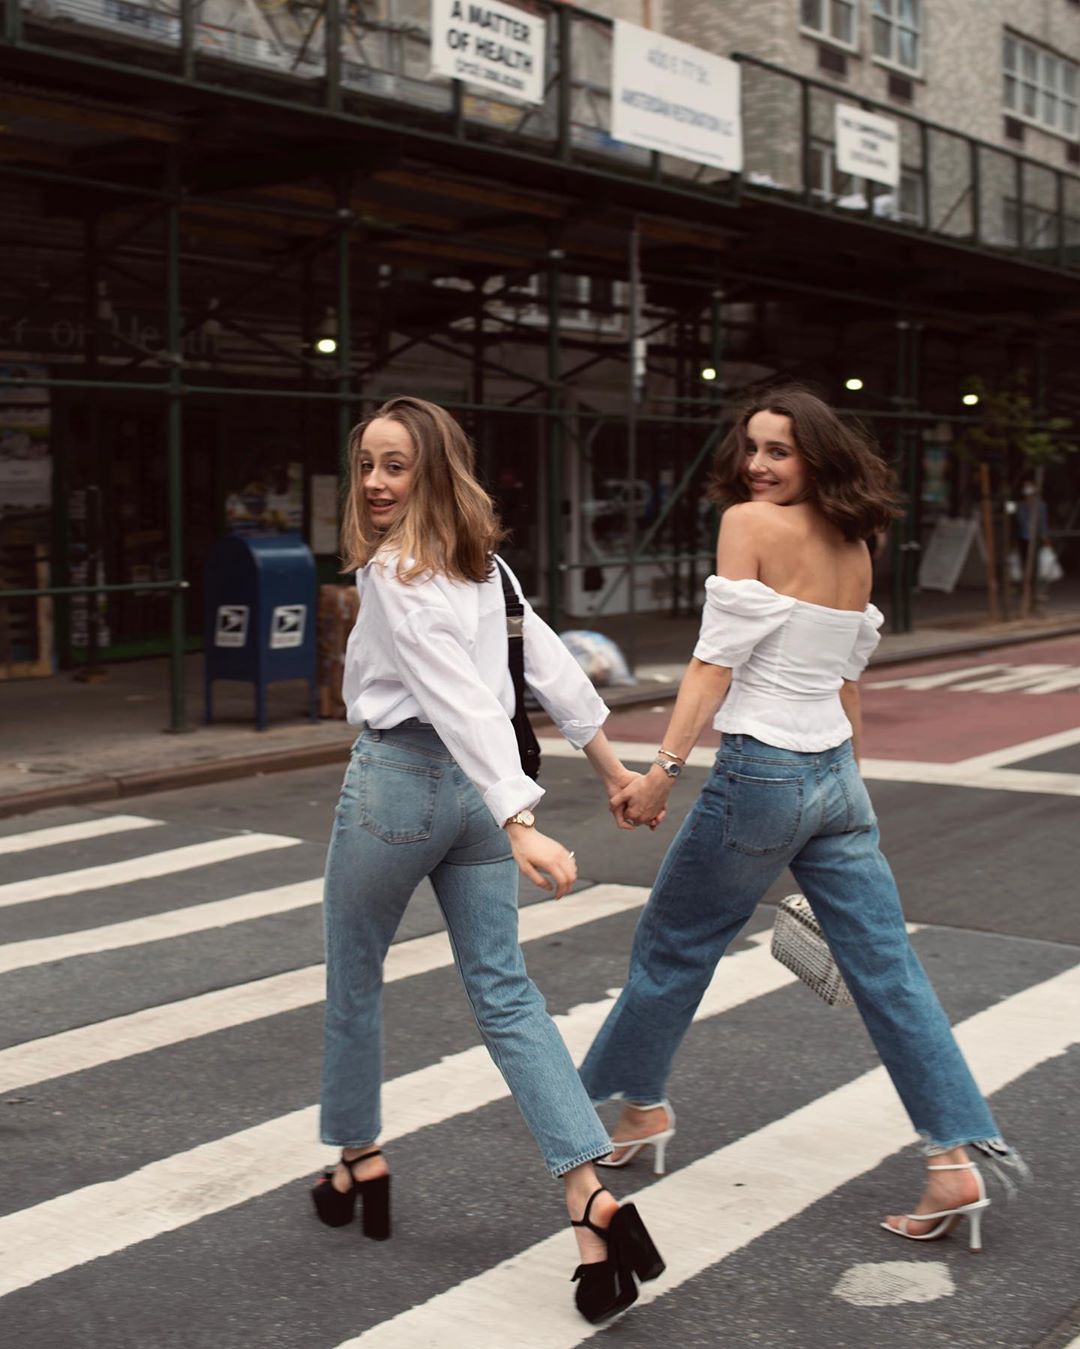 Crisp White Tops are a Timeless Summer Essential